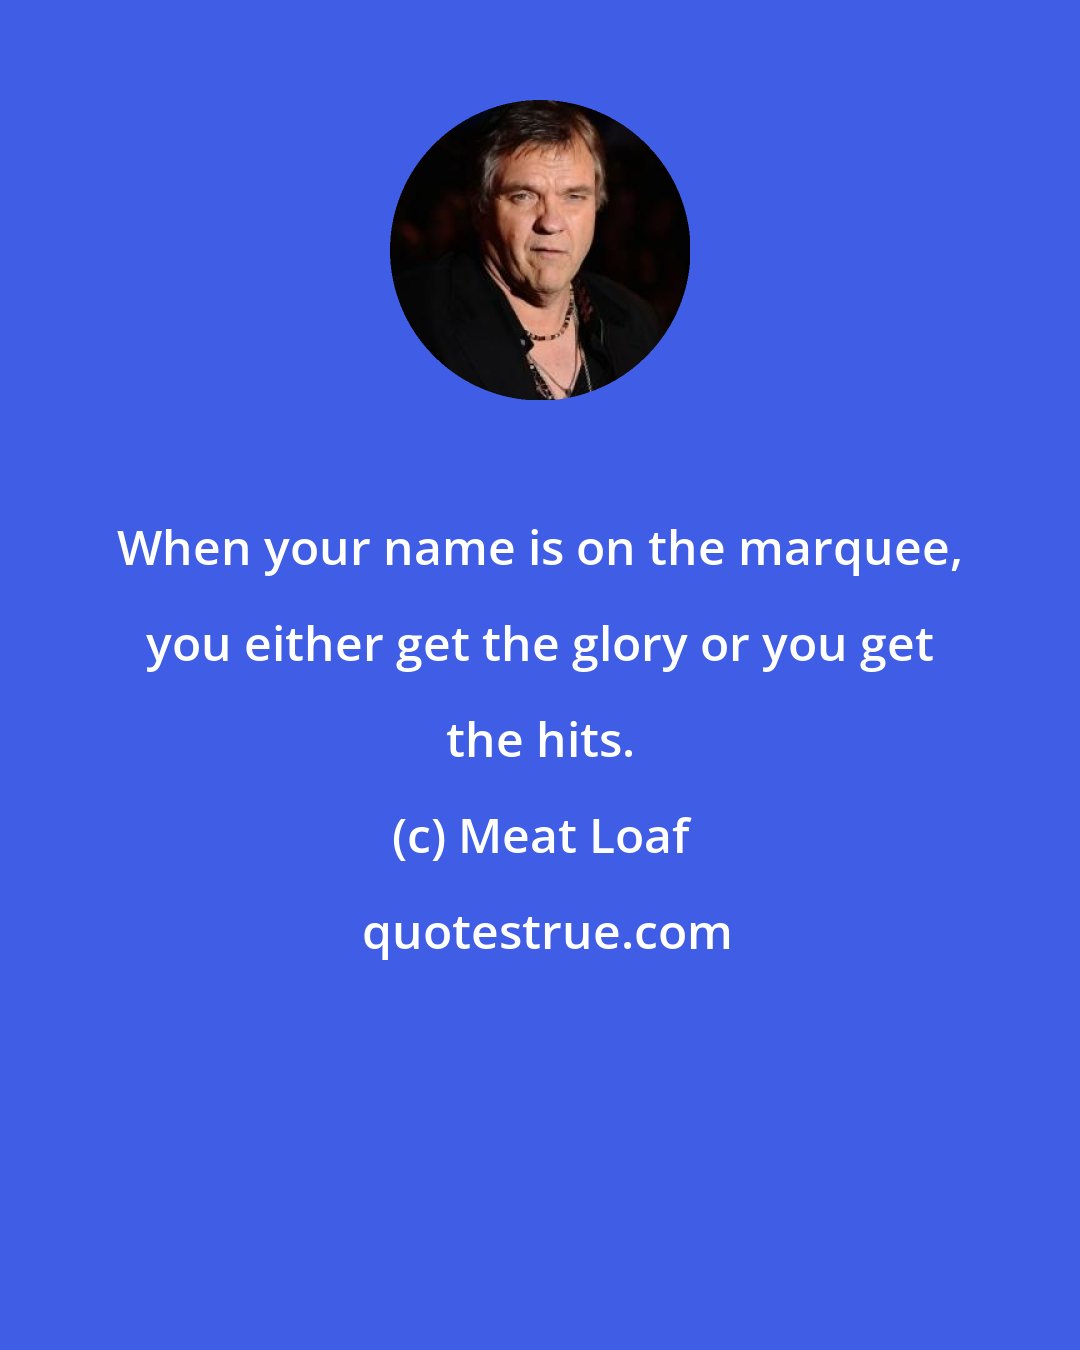 Meat Loaf: When your name is on the marquee, you either get the glory or you get the hits.